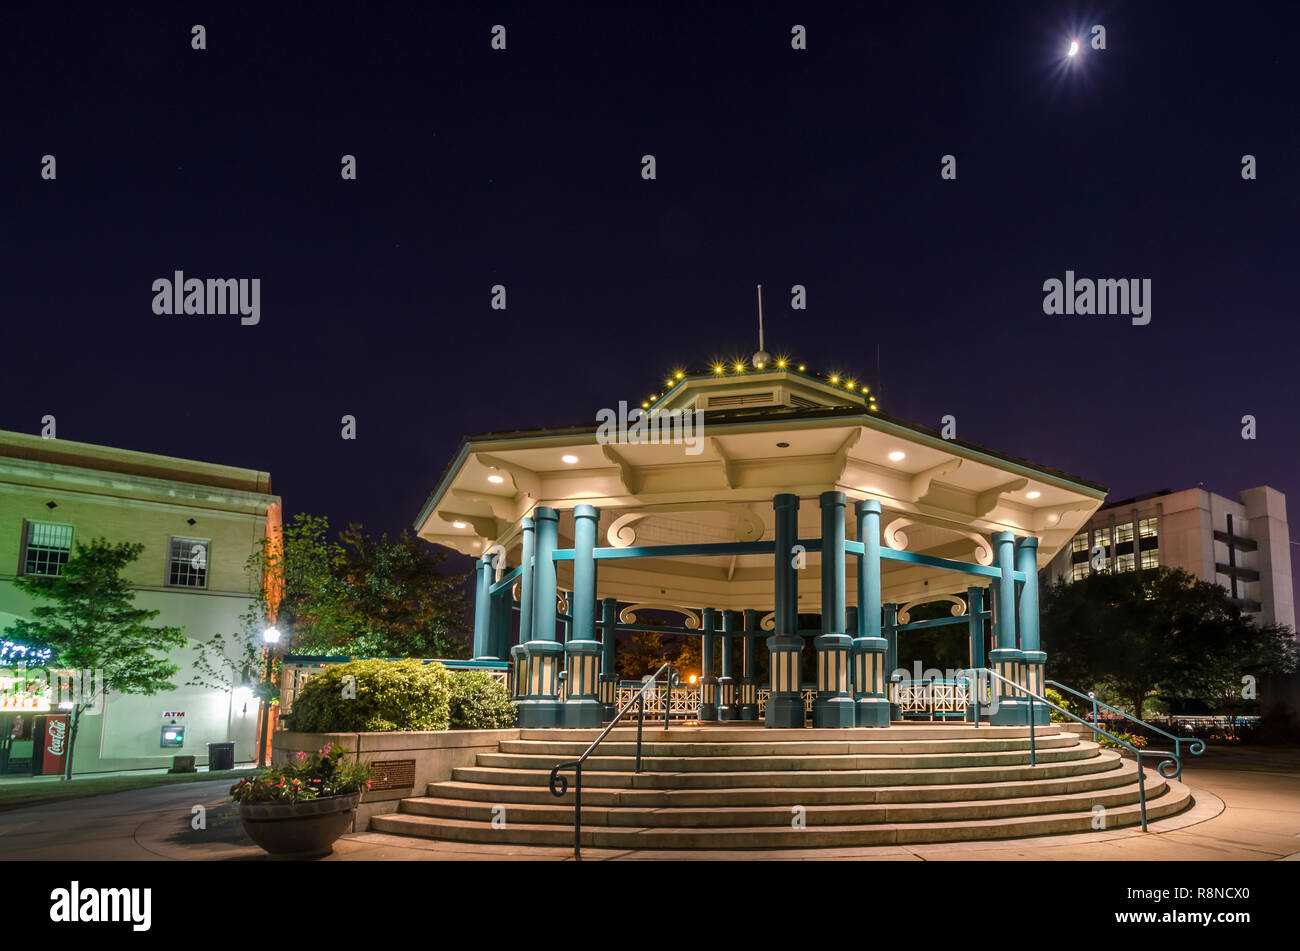 Decatur Square's gazebo and bandstand is pictured at night, June 4, 2014, in Decatur, Georgia. Stock Photo